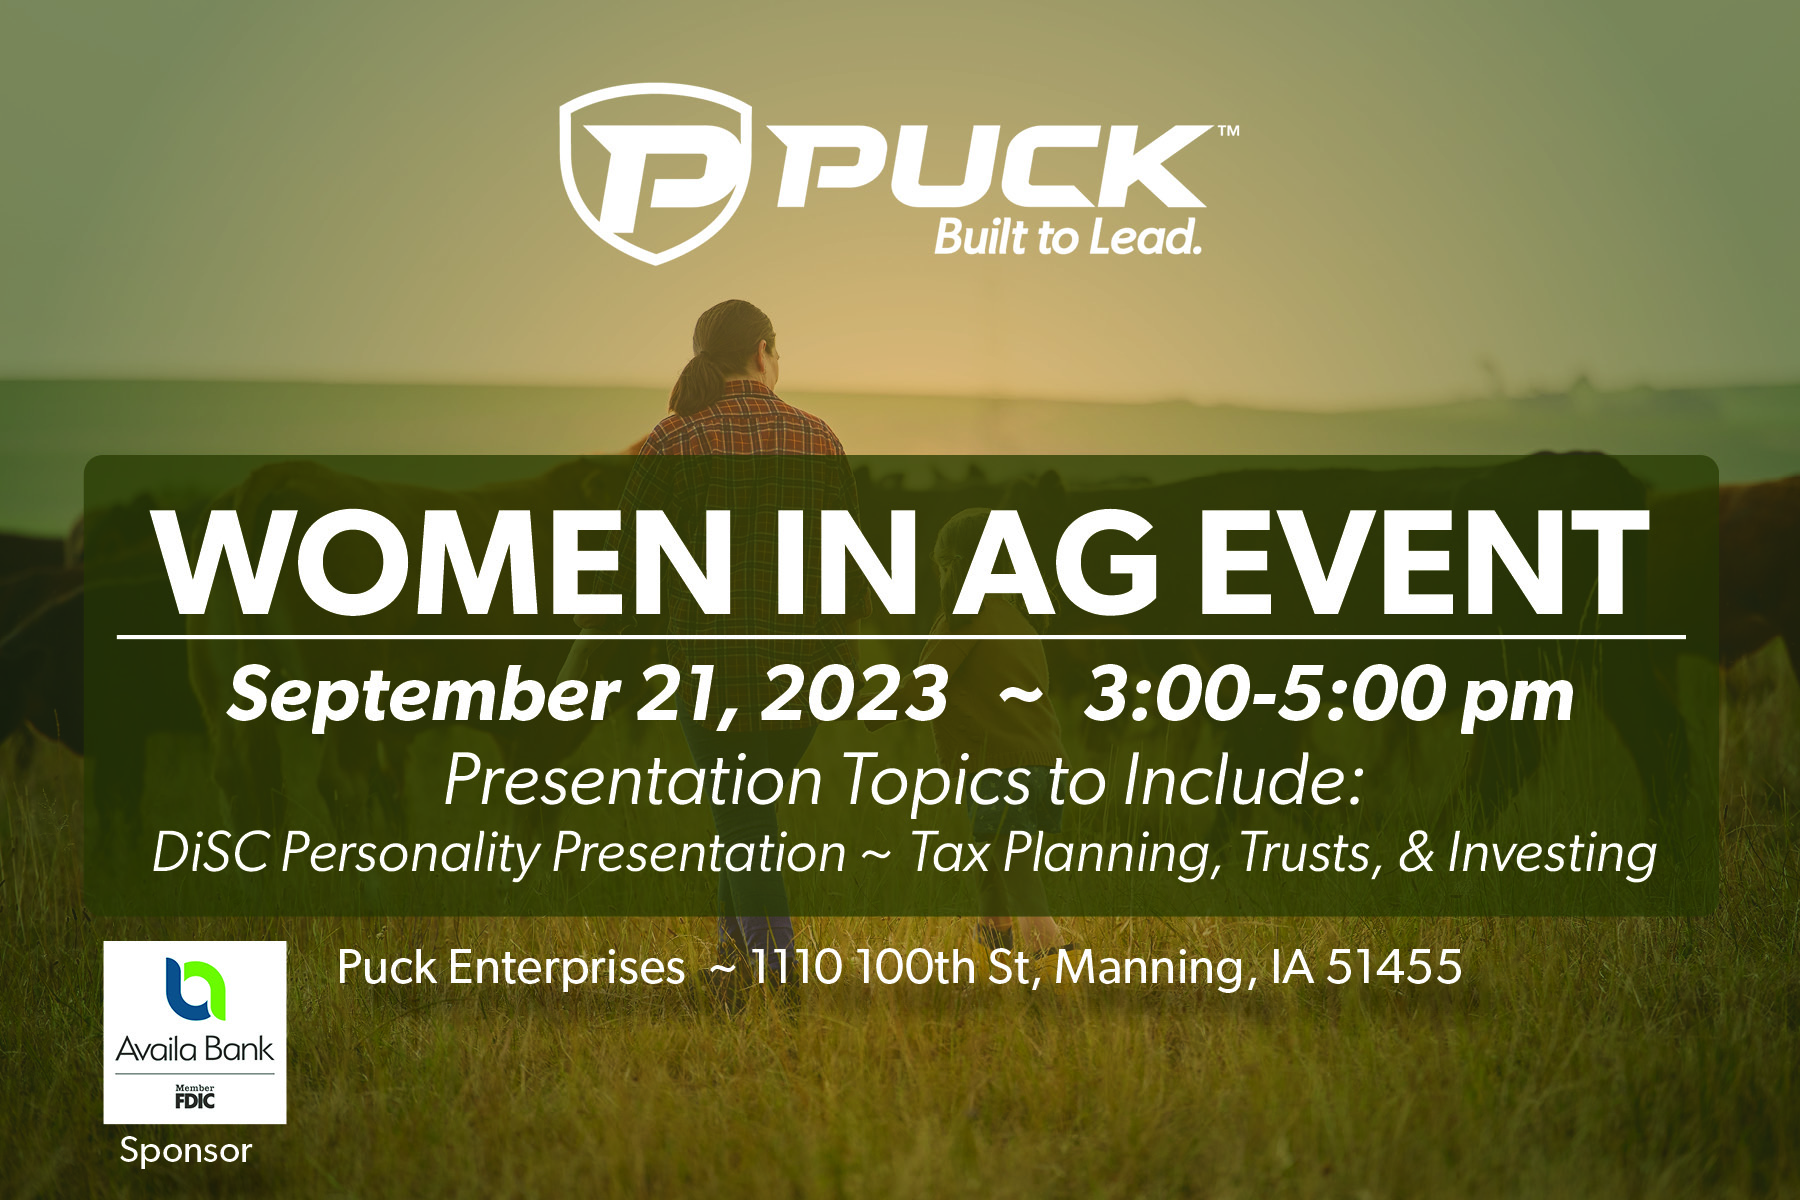 Women in Ag Event Invitational Flyer reads: September 21, 2023 ~ 3:00-5:00 pm | Presentation Topics to include: DiSC Personality Training ~ Tax Planning, Trusts, & Investing | Puck Enterprises ~ 1110 100th St, Manning, IA 51455 | Sponsored by Availa Bank